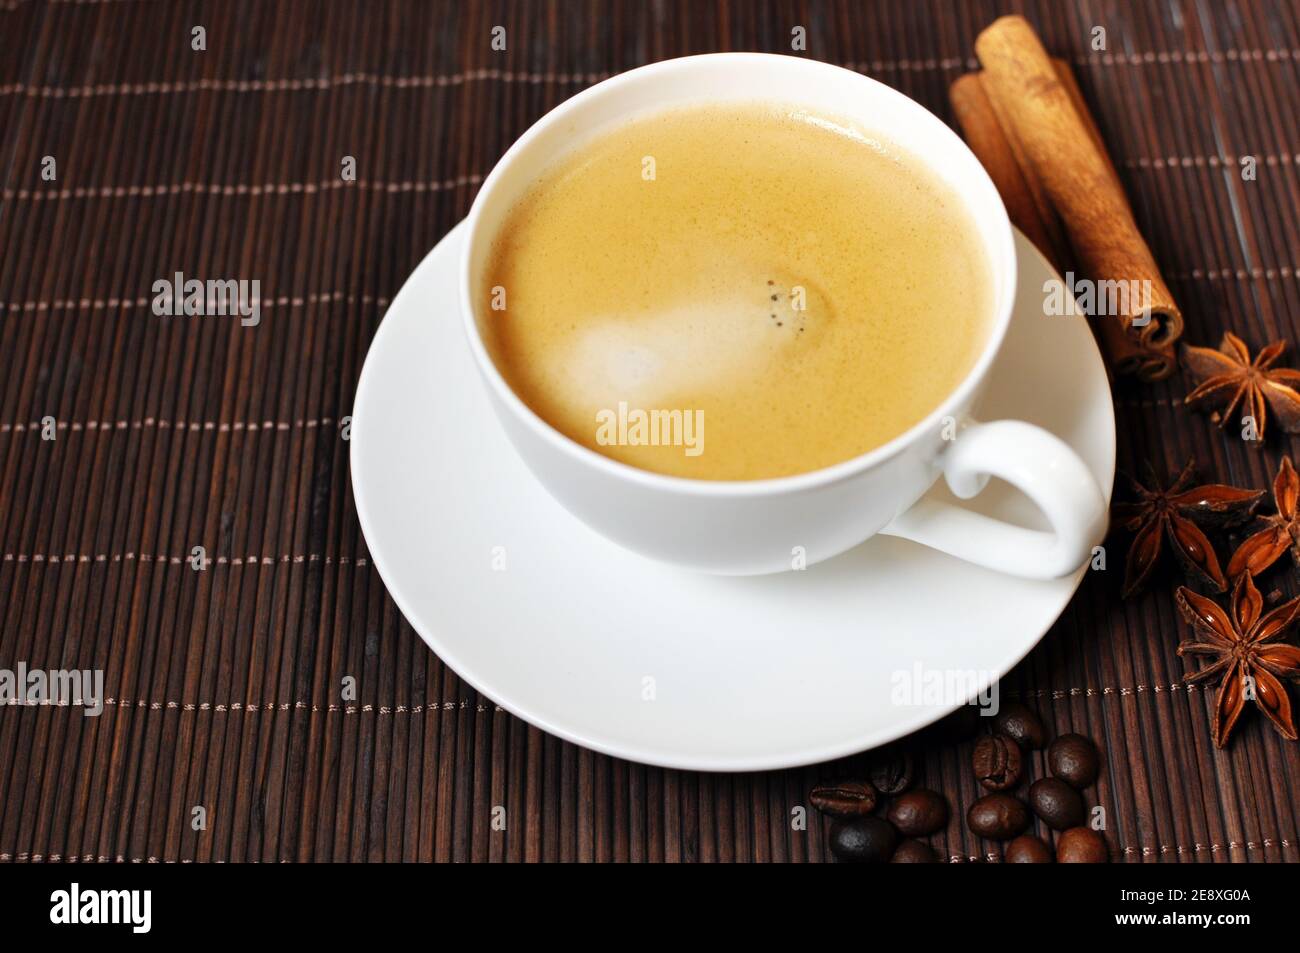 Cup of hot coffee with cinnamon and anise star decoration on brown wooden background. Top table Stock Photo